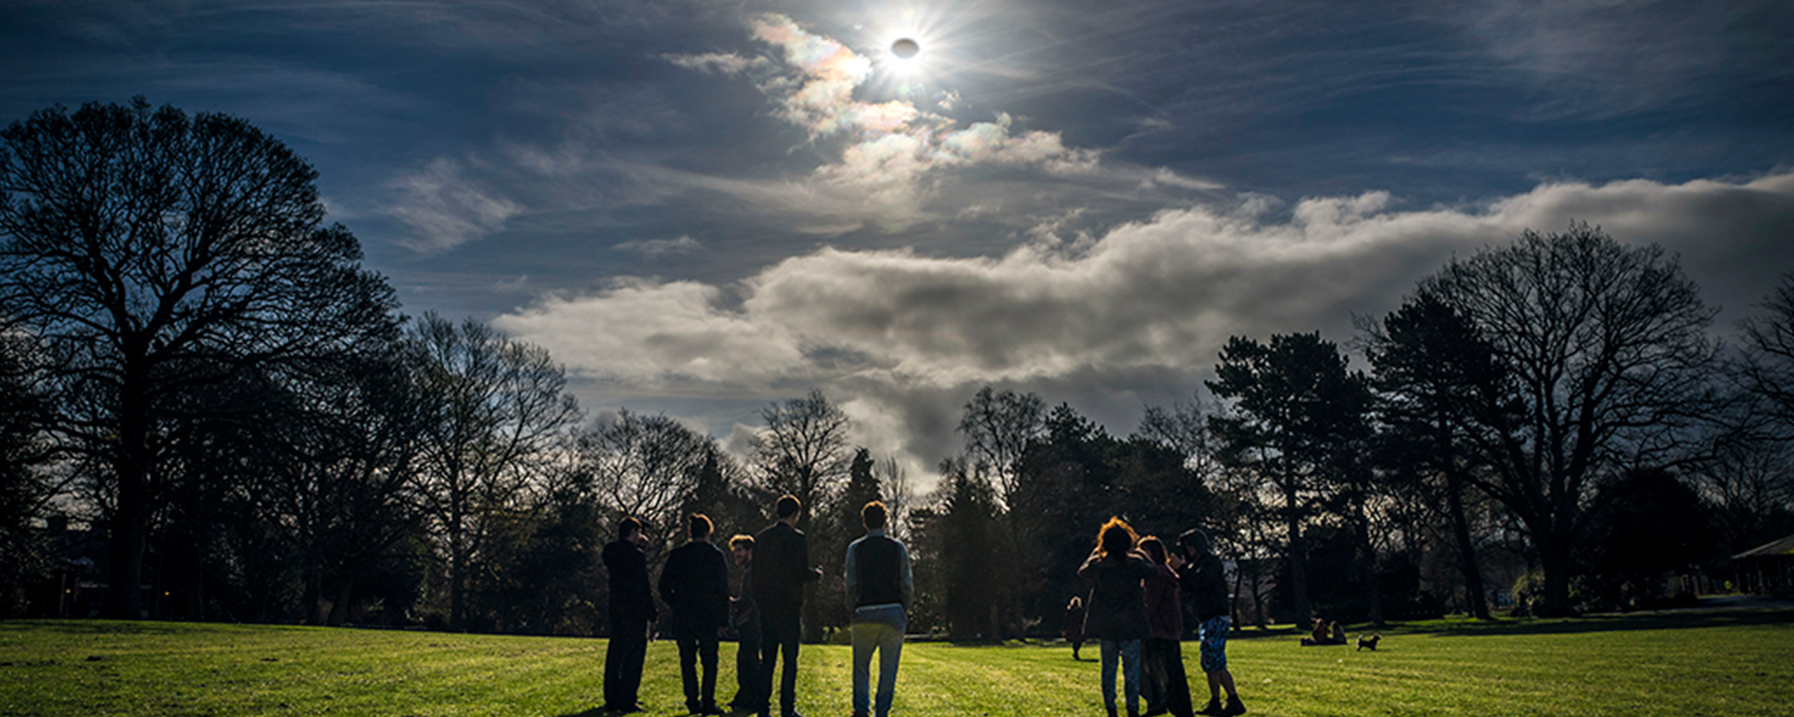 People Watching a Solar Eclipse